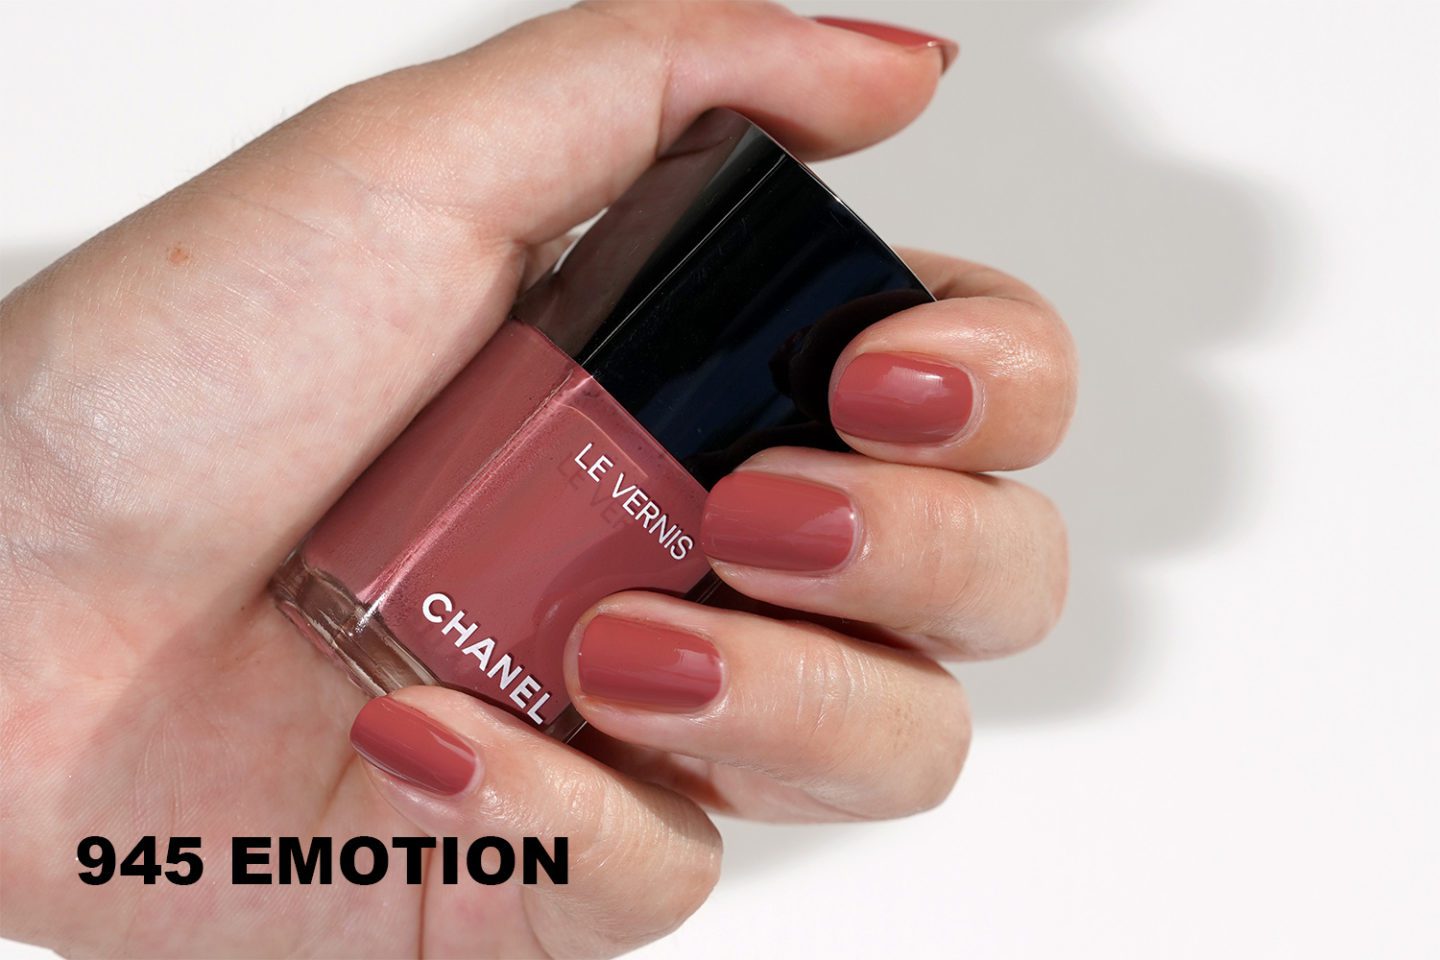 Chanel Le Vernis 945 Emotion swatch